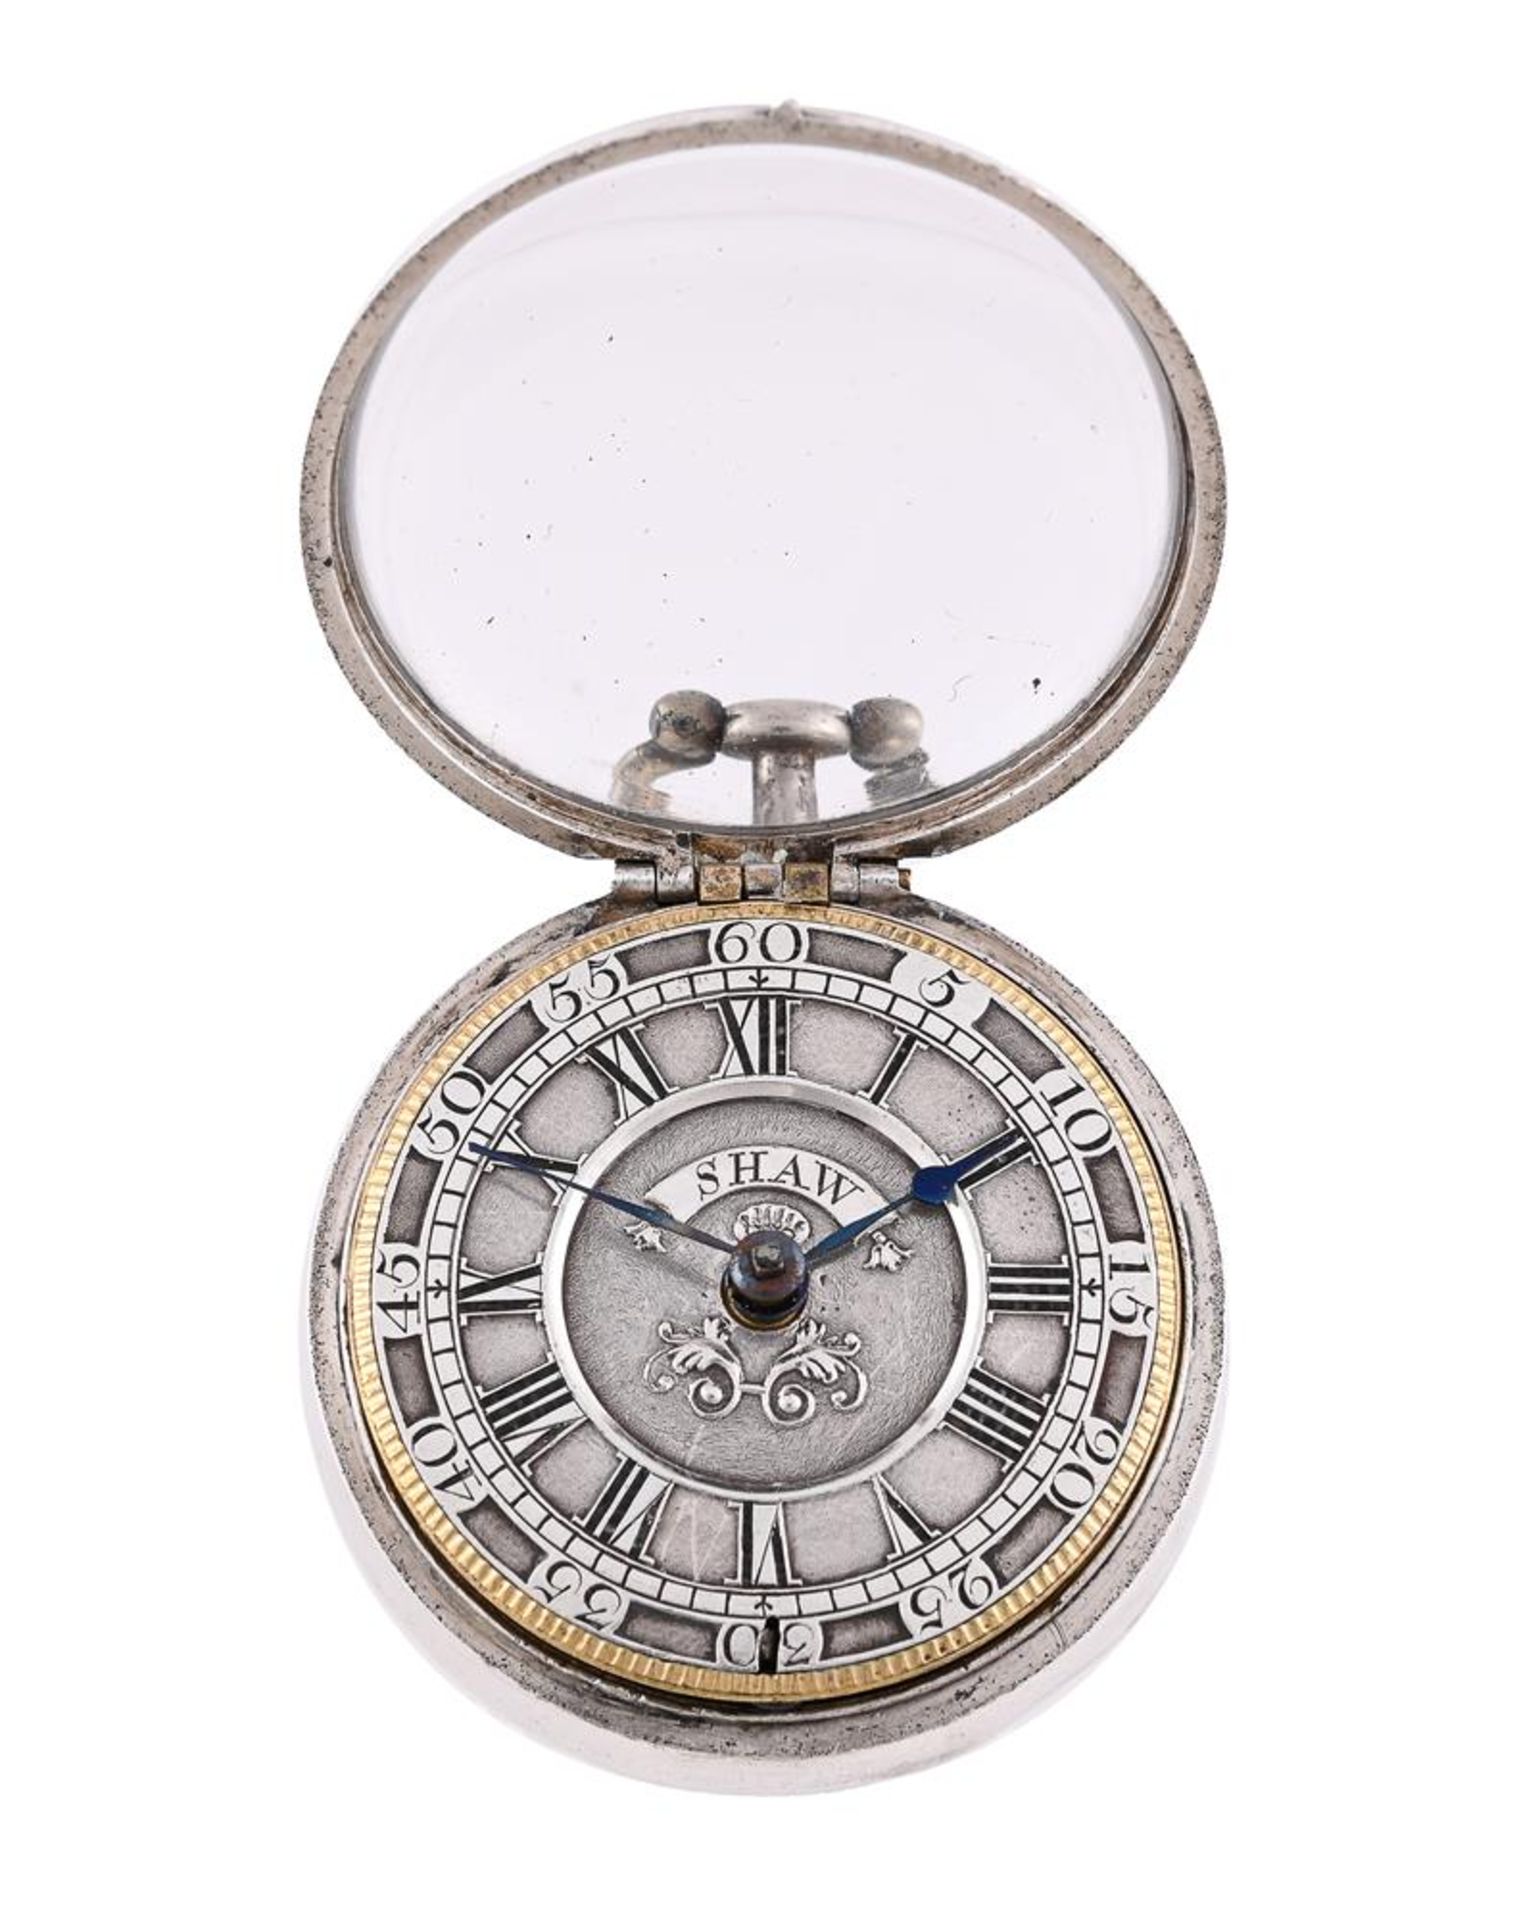 A GEORGE II SILVER PAIR-VASED VERGE POCKET WATCH WITH CHAMPLEVE DIAL - Image 2 of 3